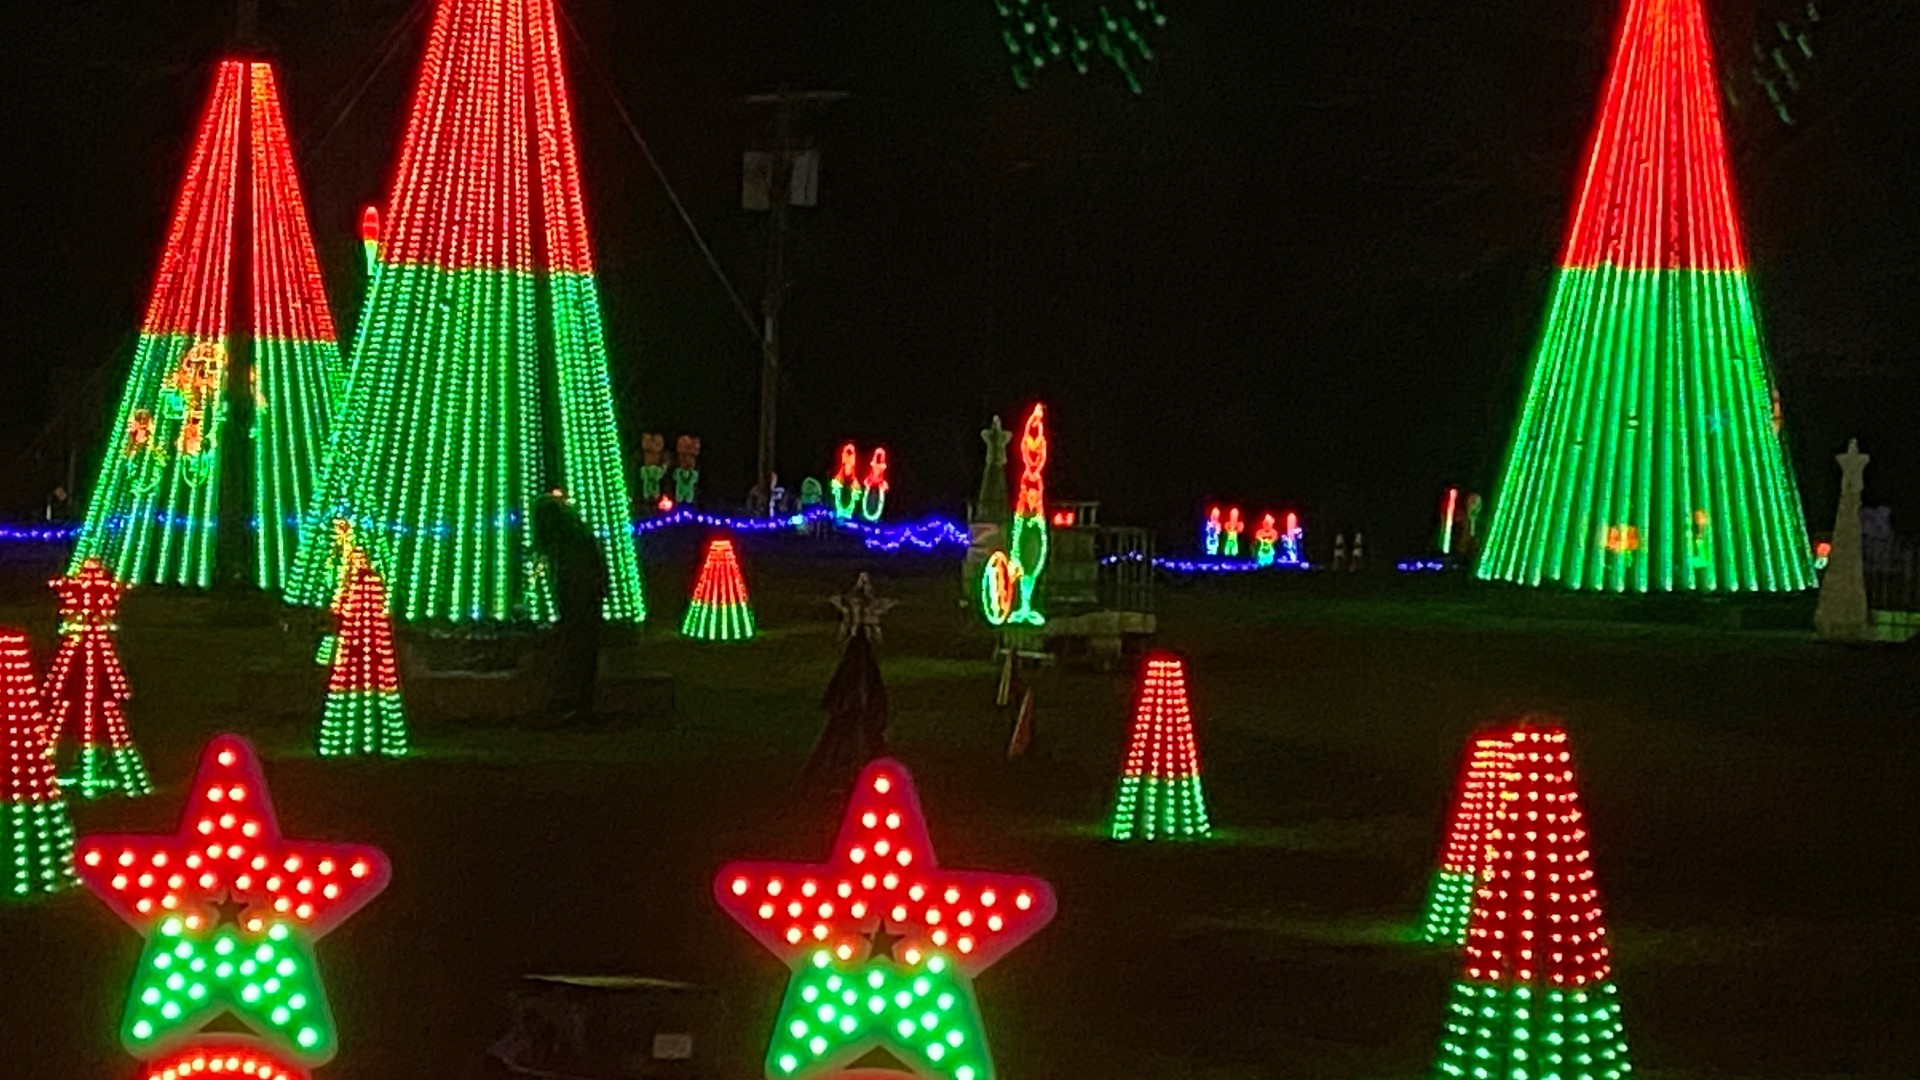 A bright idea has evolved into a destination for those in search of yuletide illumination on the Hebron Fairgrounds.